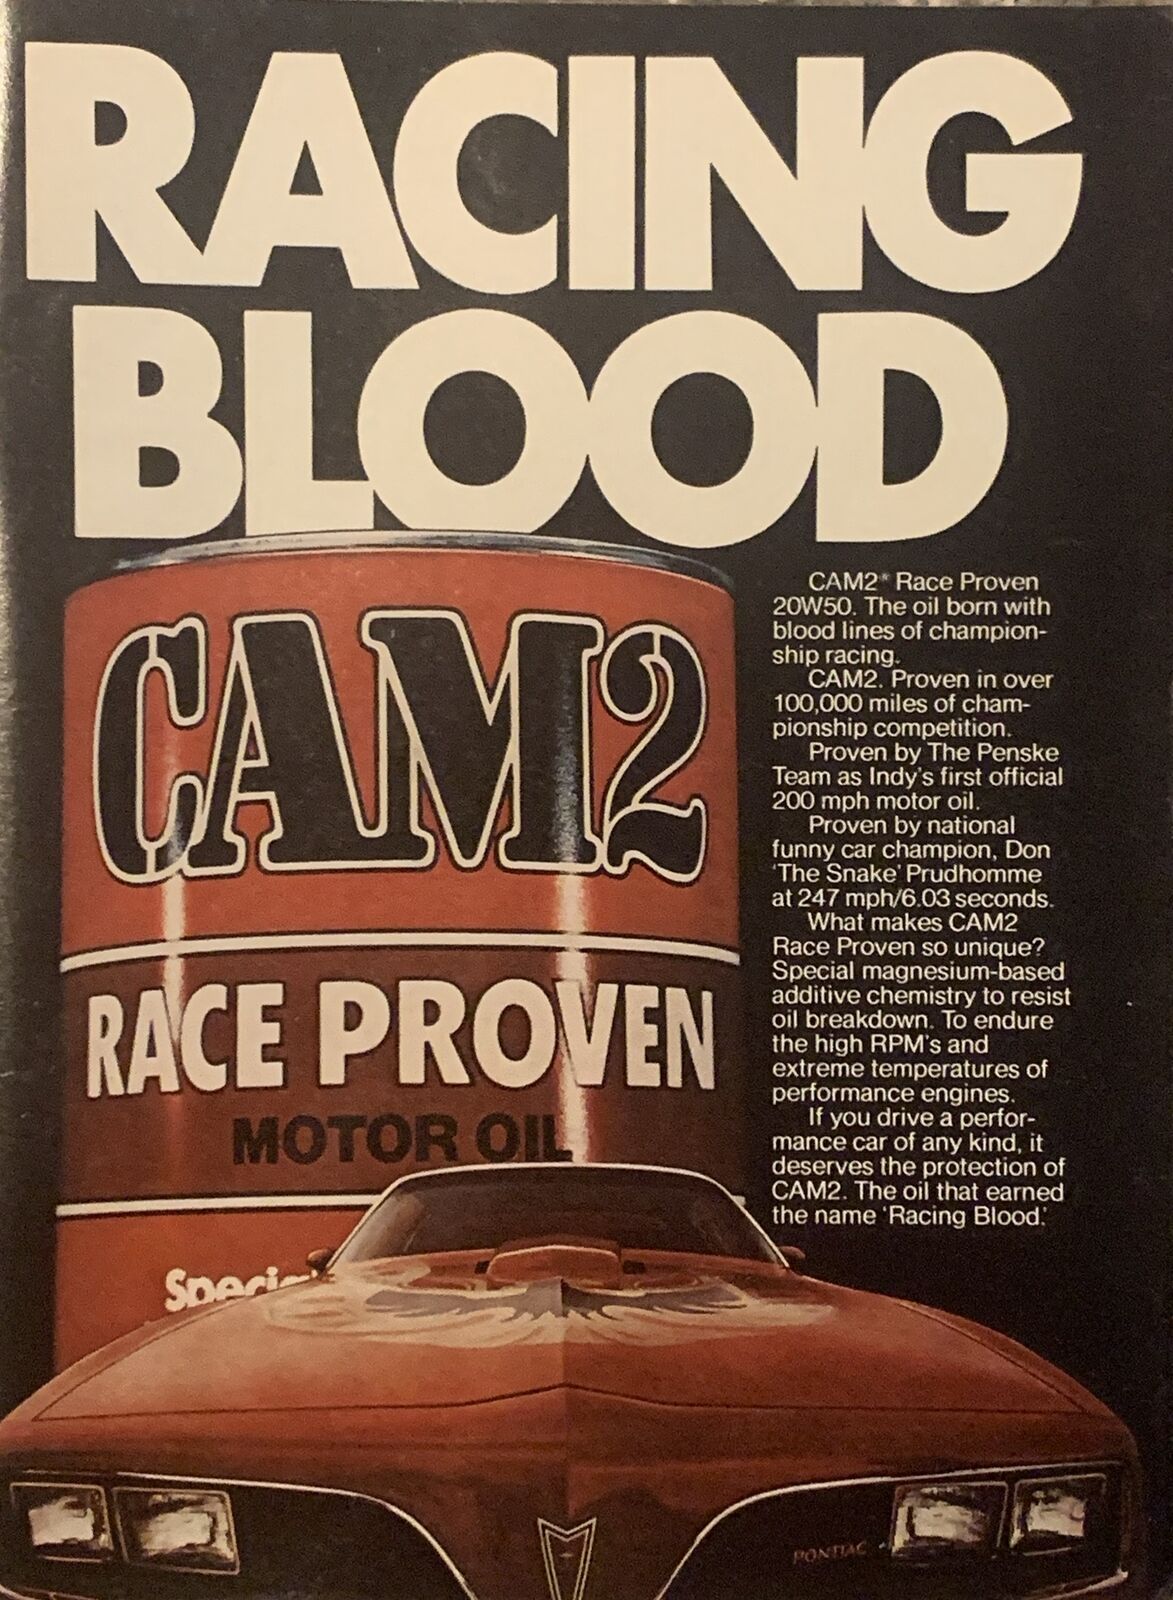 1978 CAM2 Race Proven Motor Oil VTG 1970s PRINT AD Trans Am - Racing Blood